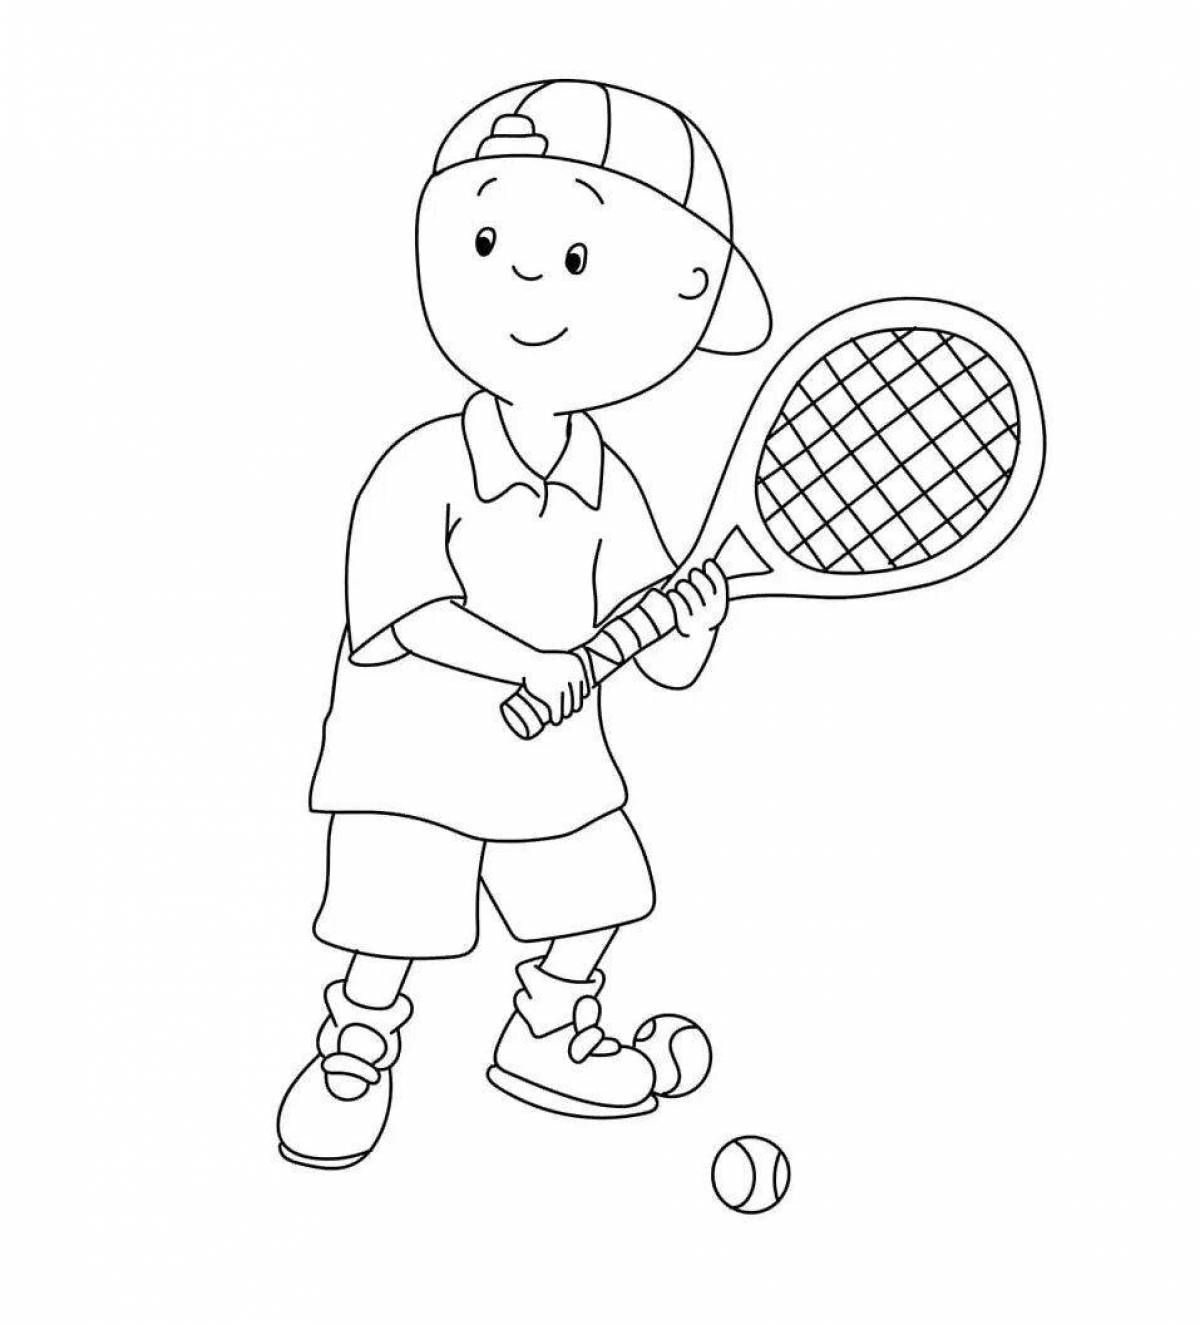 Attracting athletes coloring pages for kids